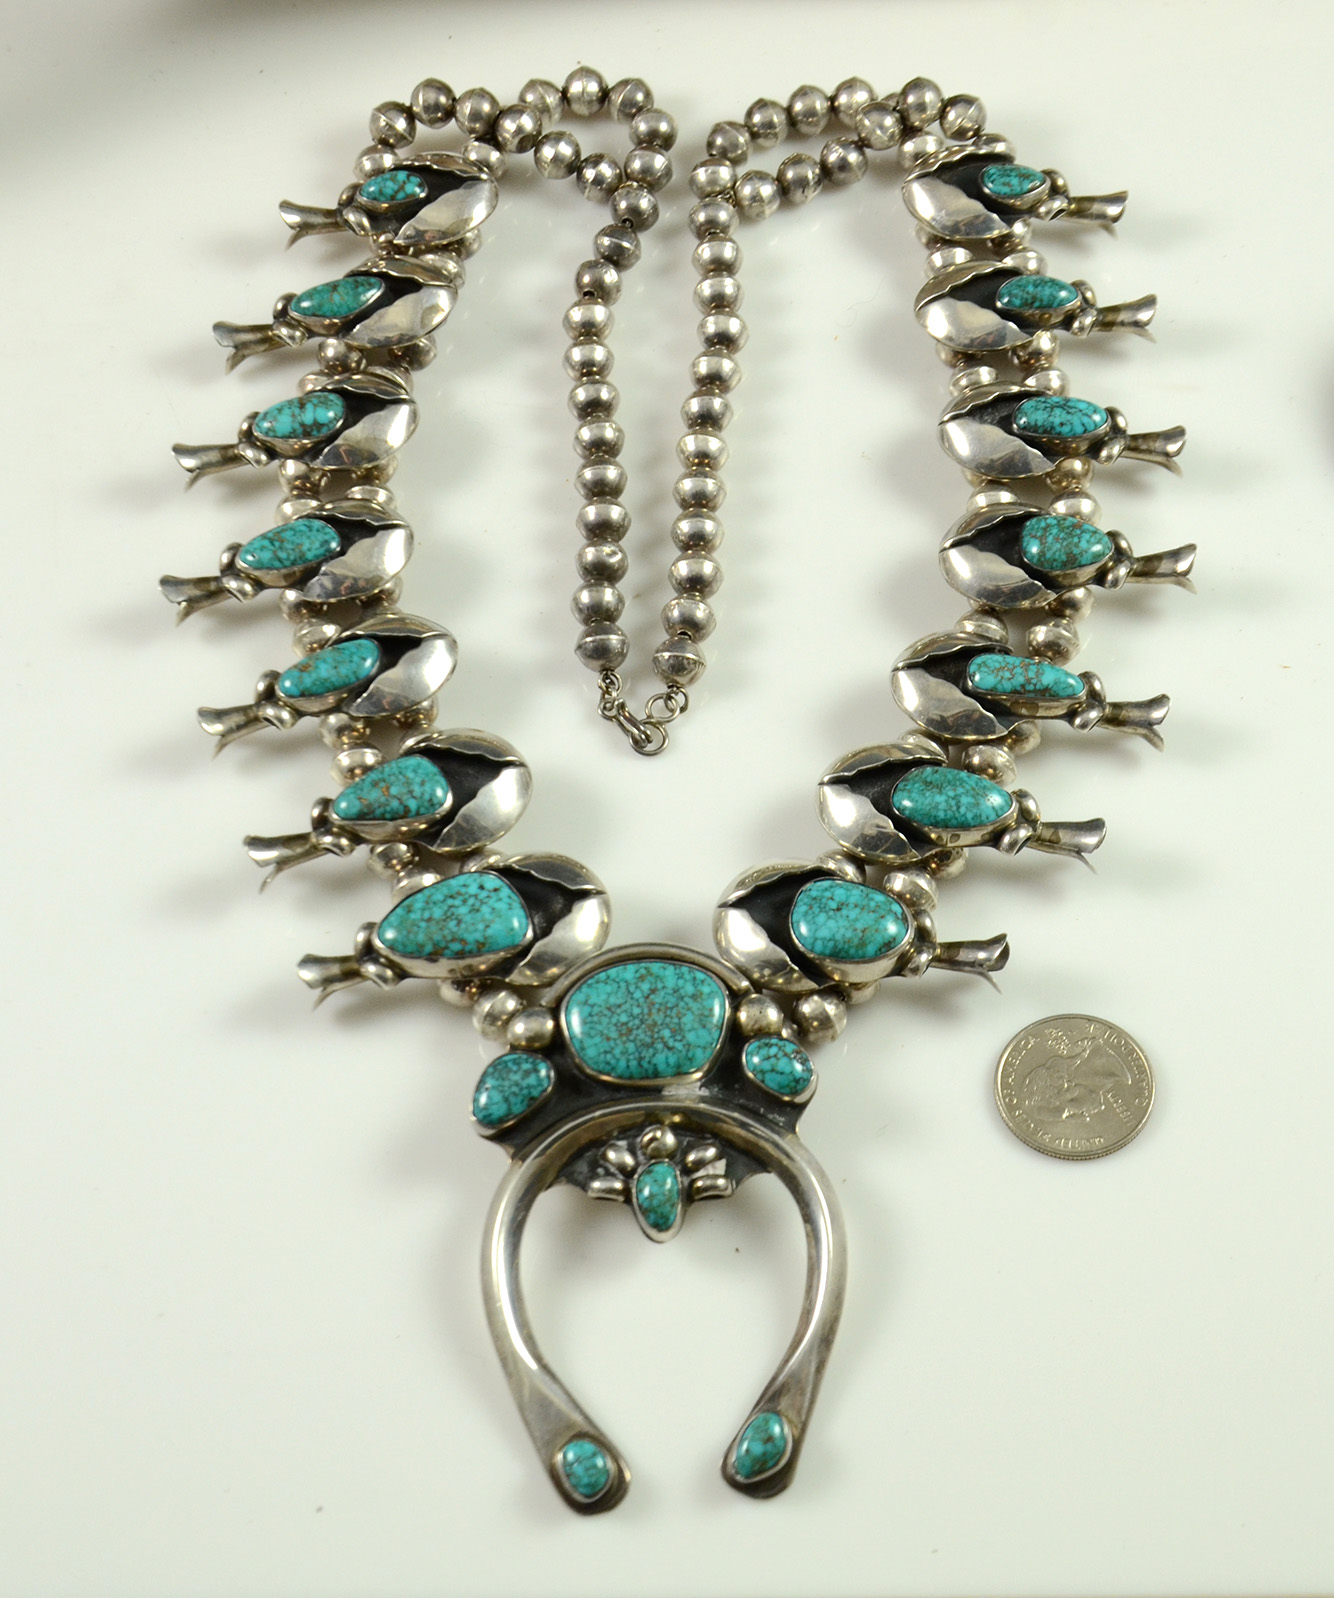 Lone Mountain Turquoise Squash Blossom Necklace - Hoel's Indian Shop